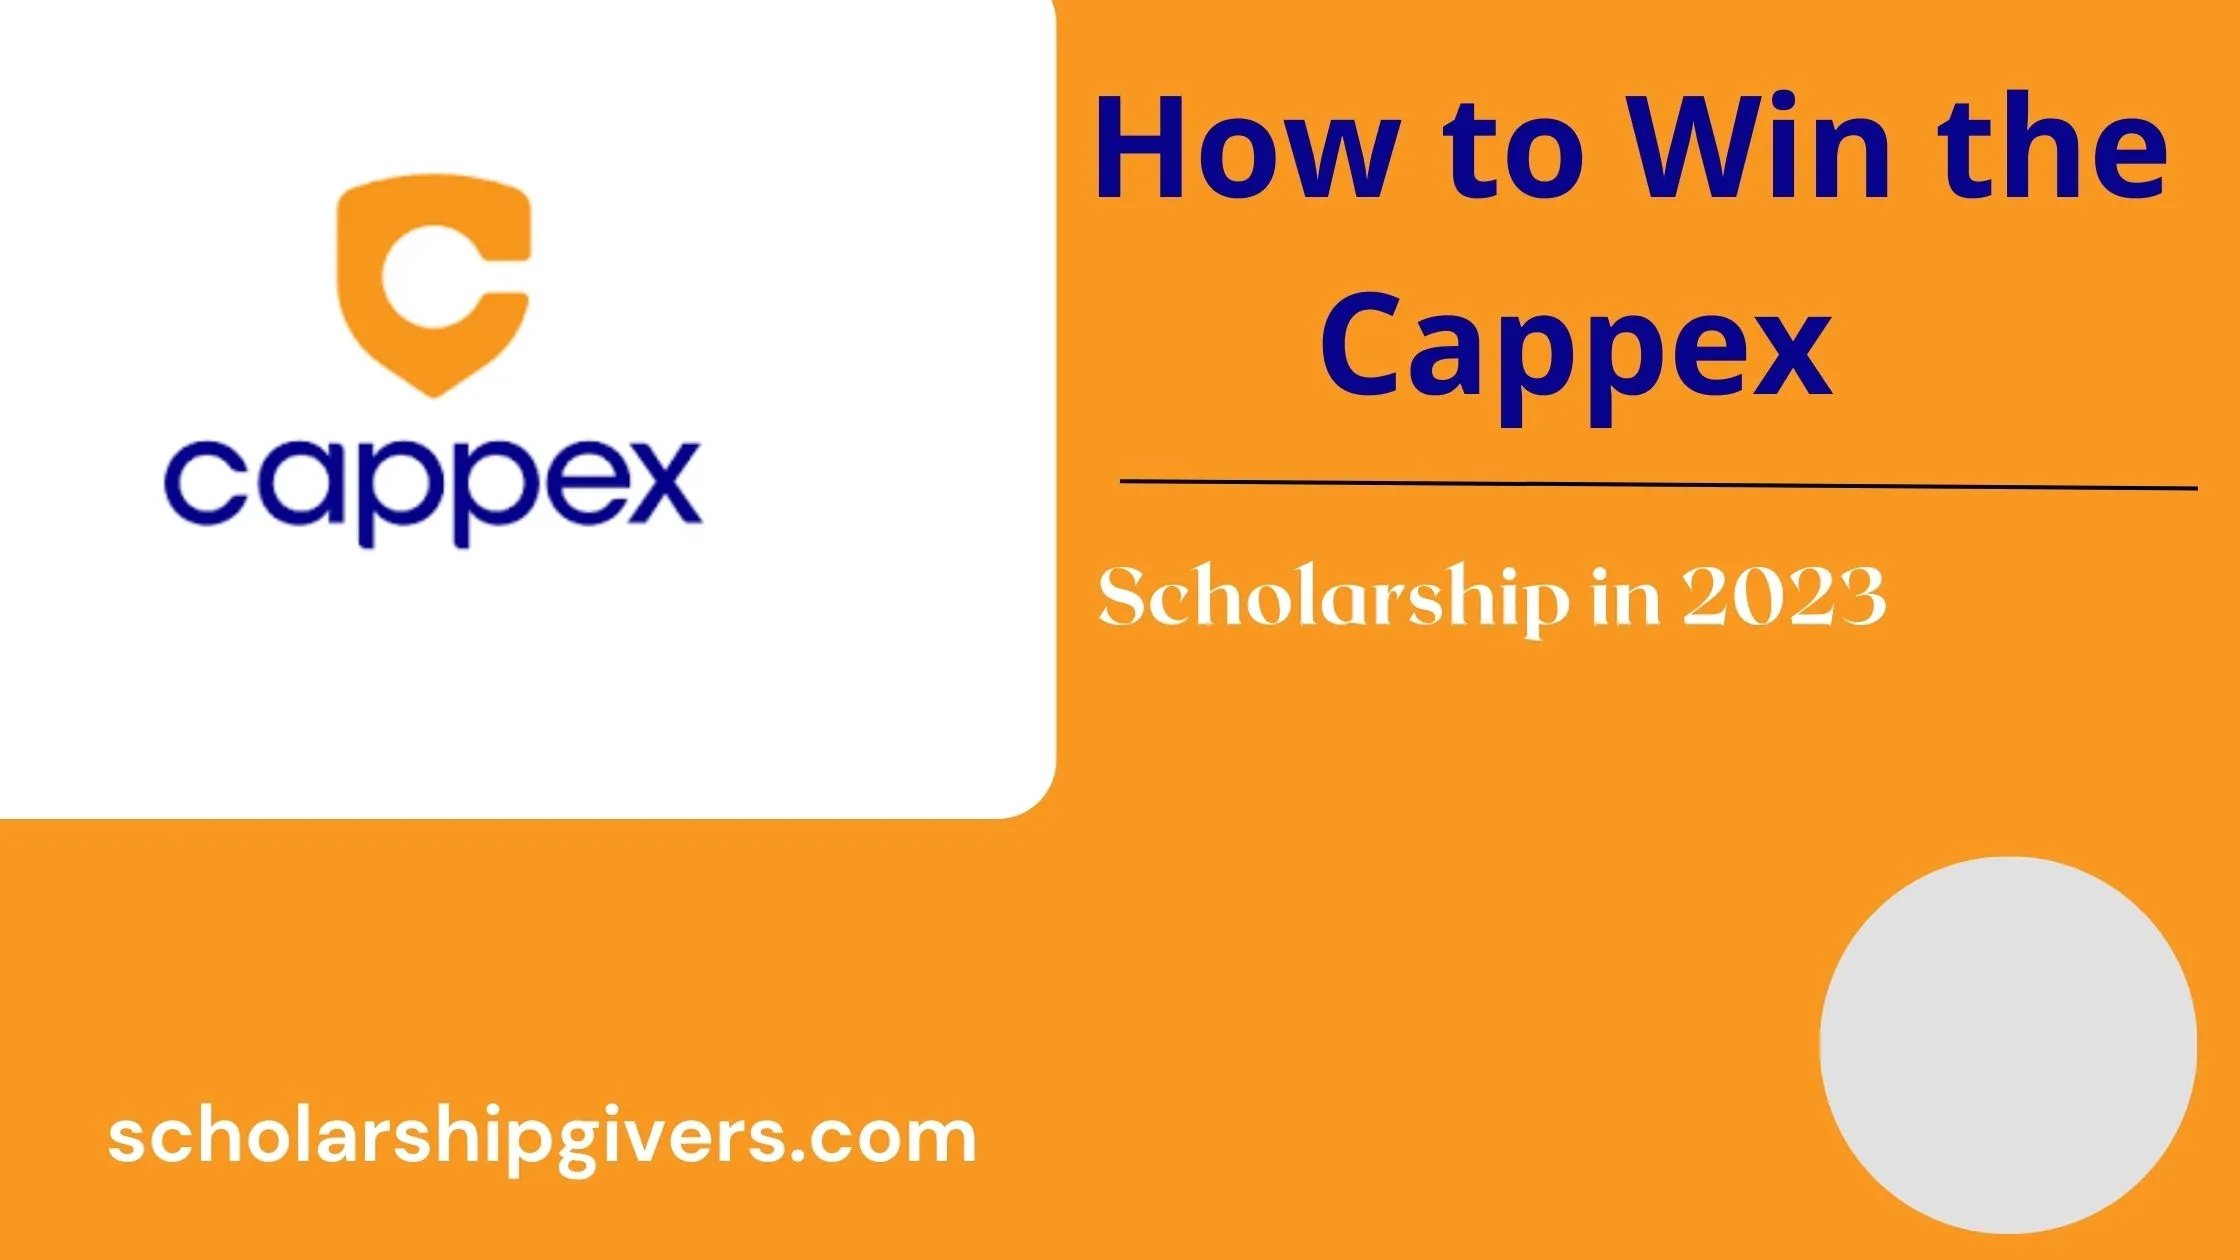 How to Win the Cappex Scholarship in 2023